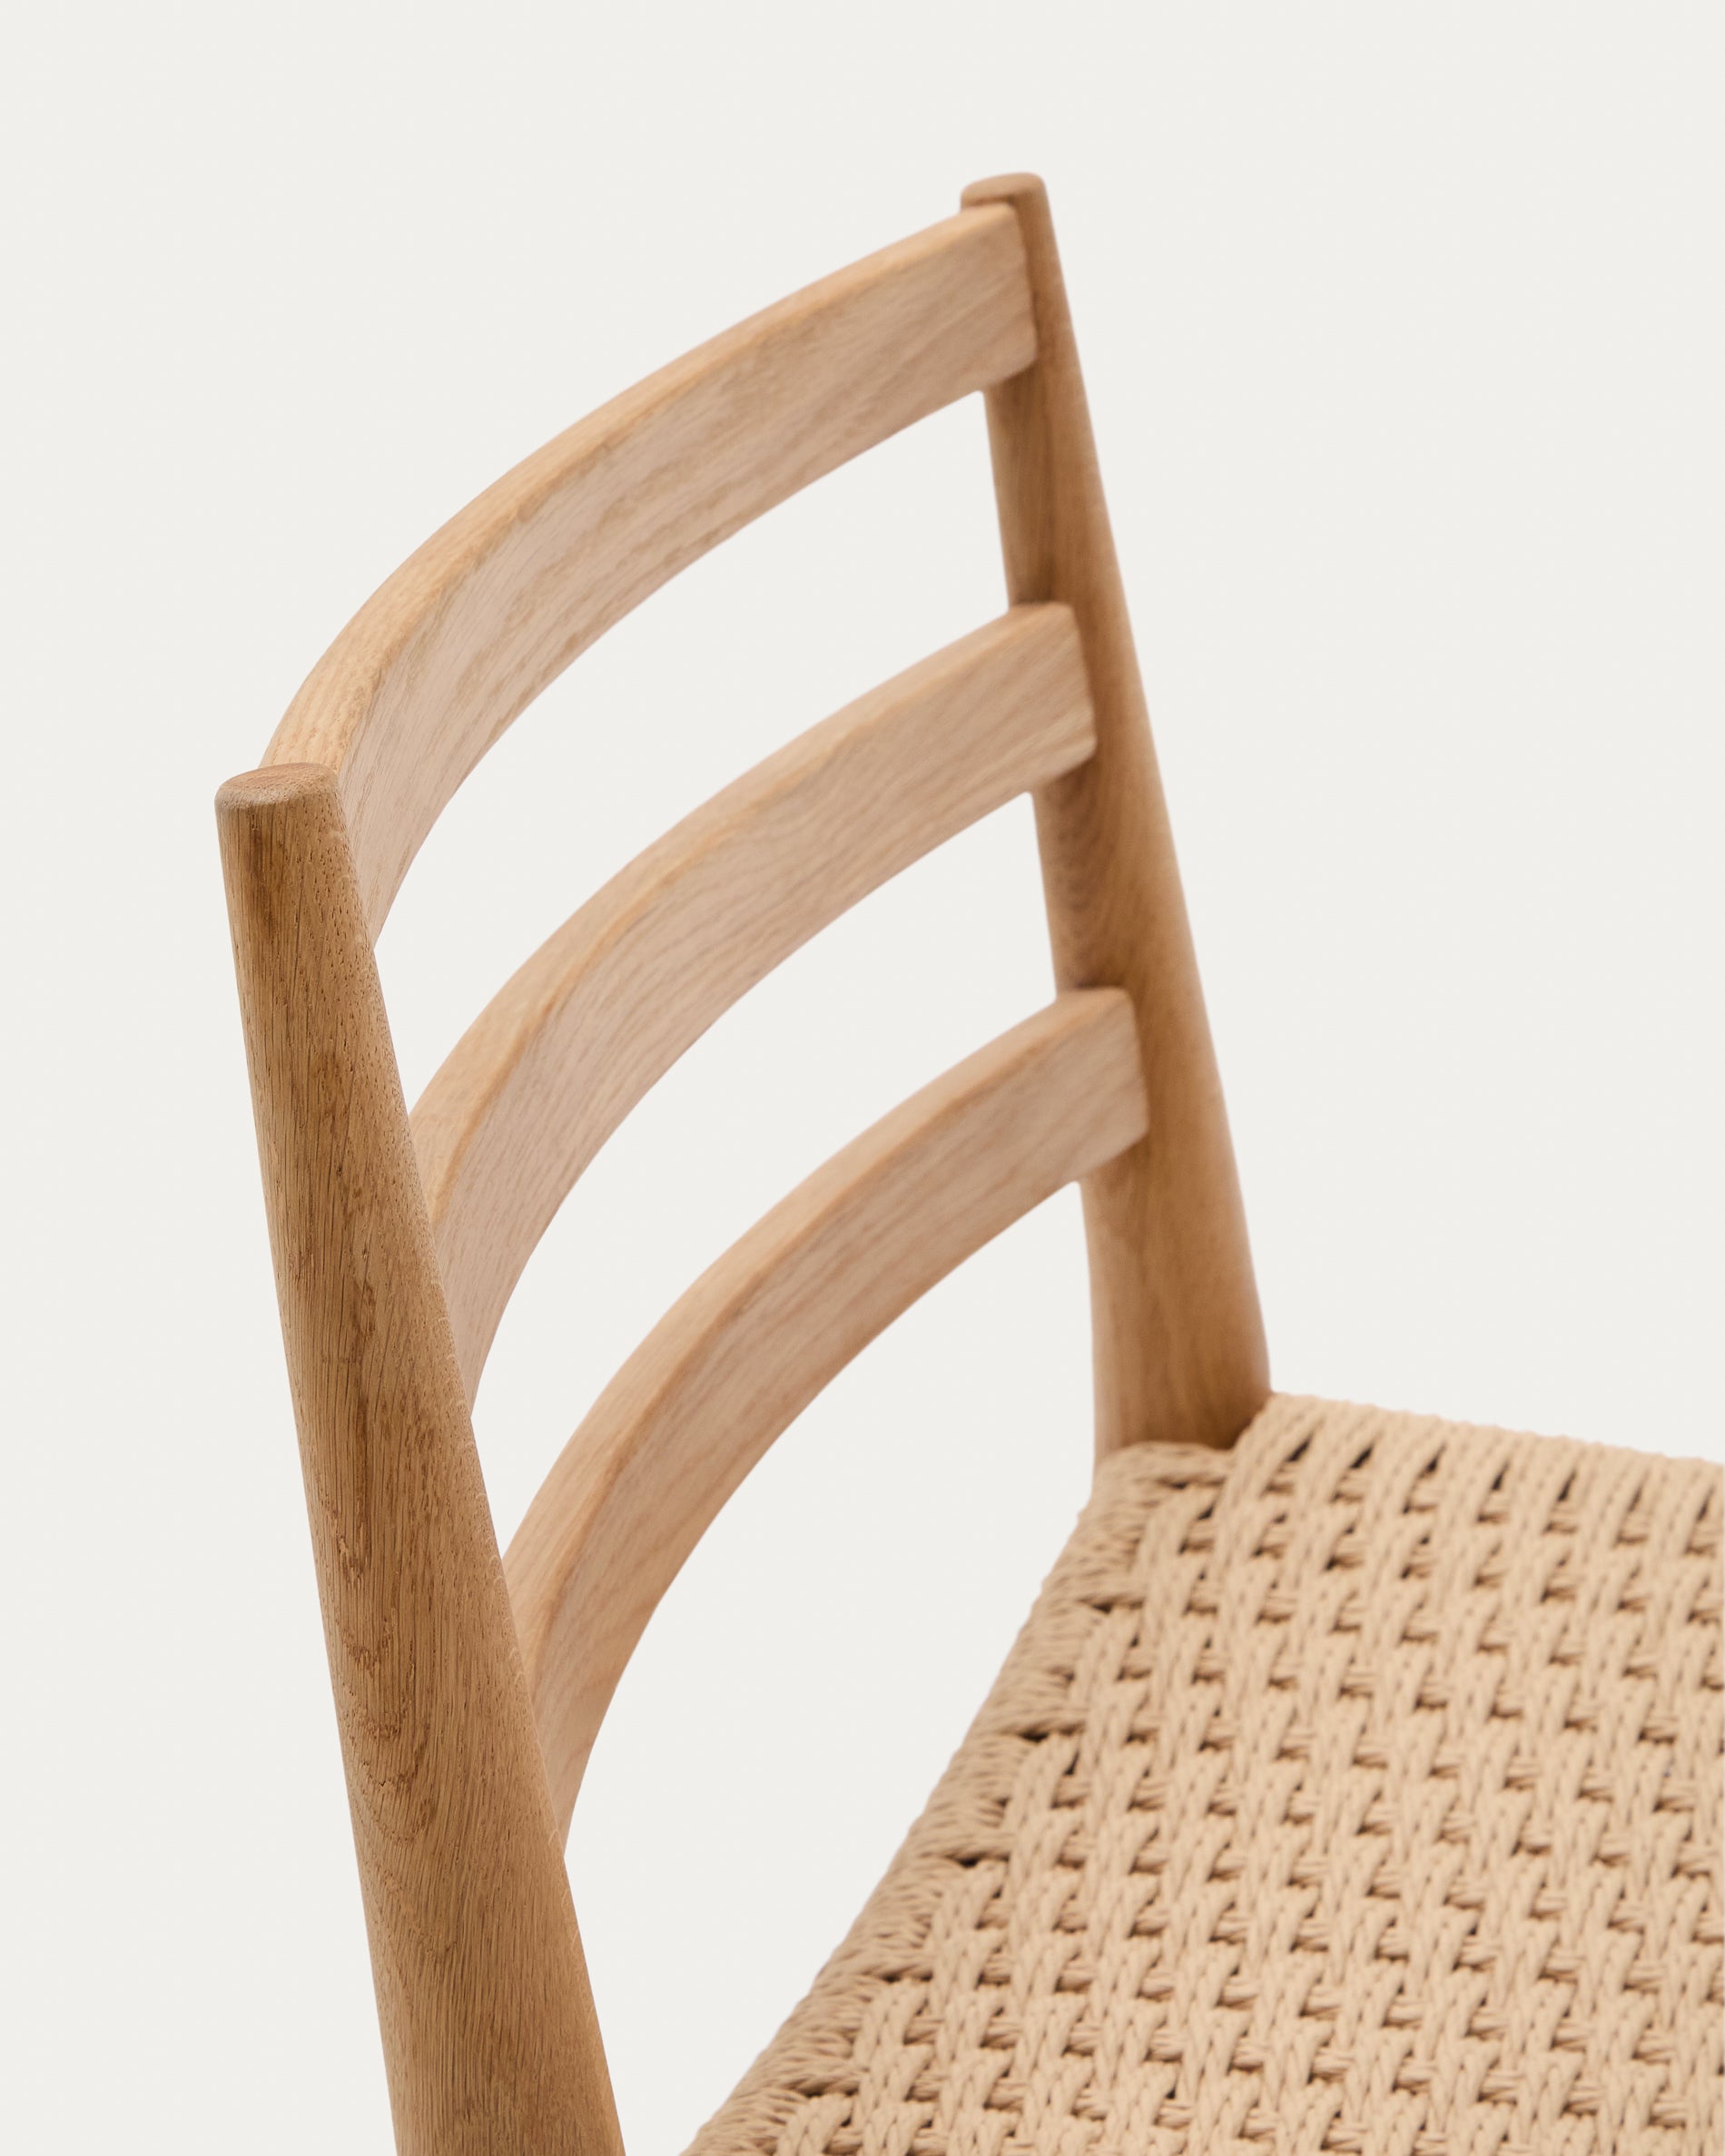 Analy chair with back, solid oak with natural finish and rope seat, 70 cm 100% FSC